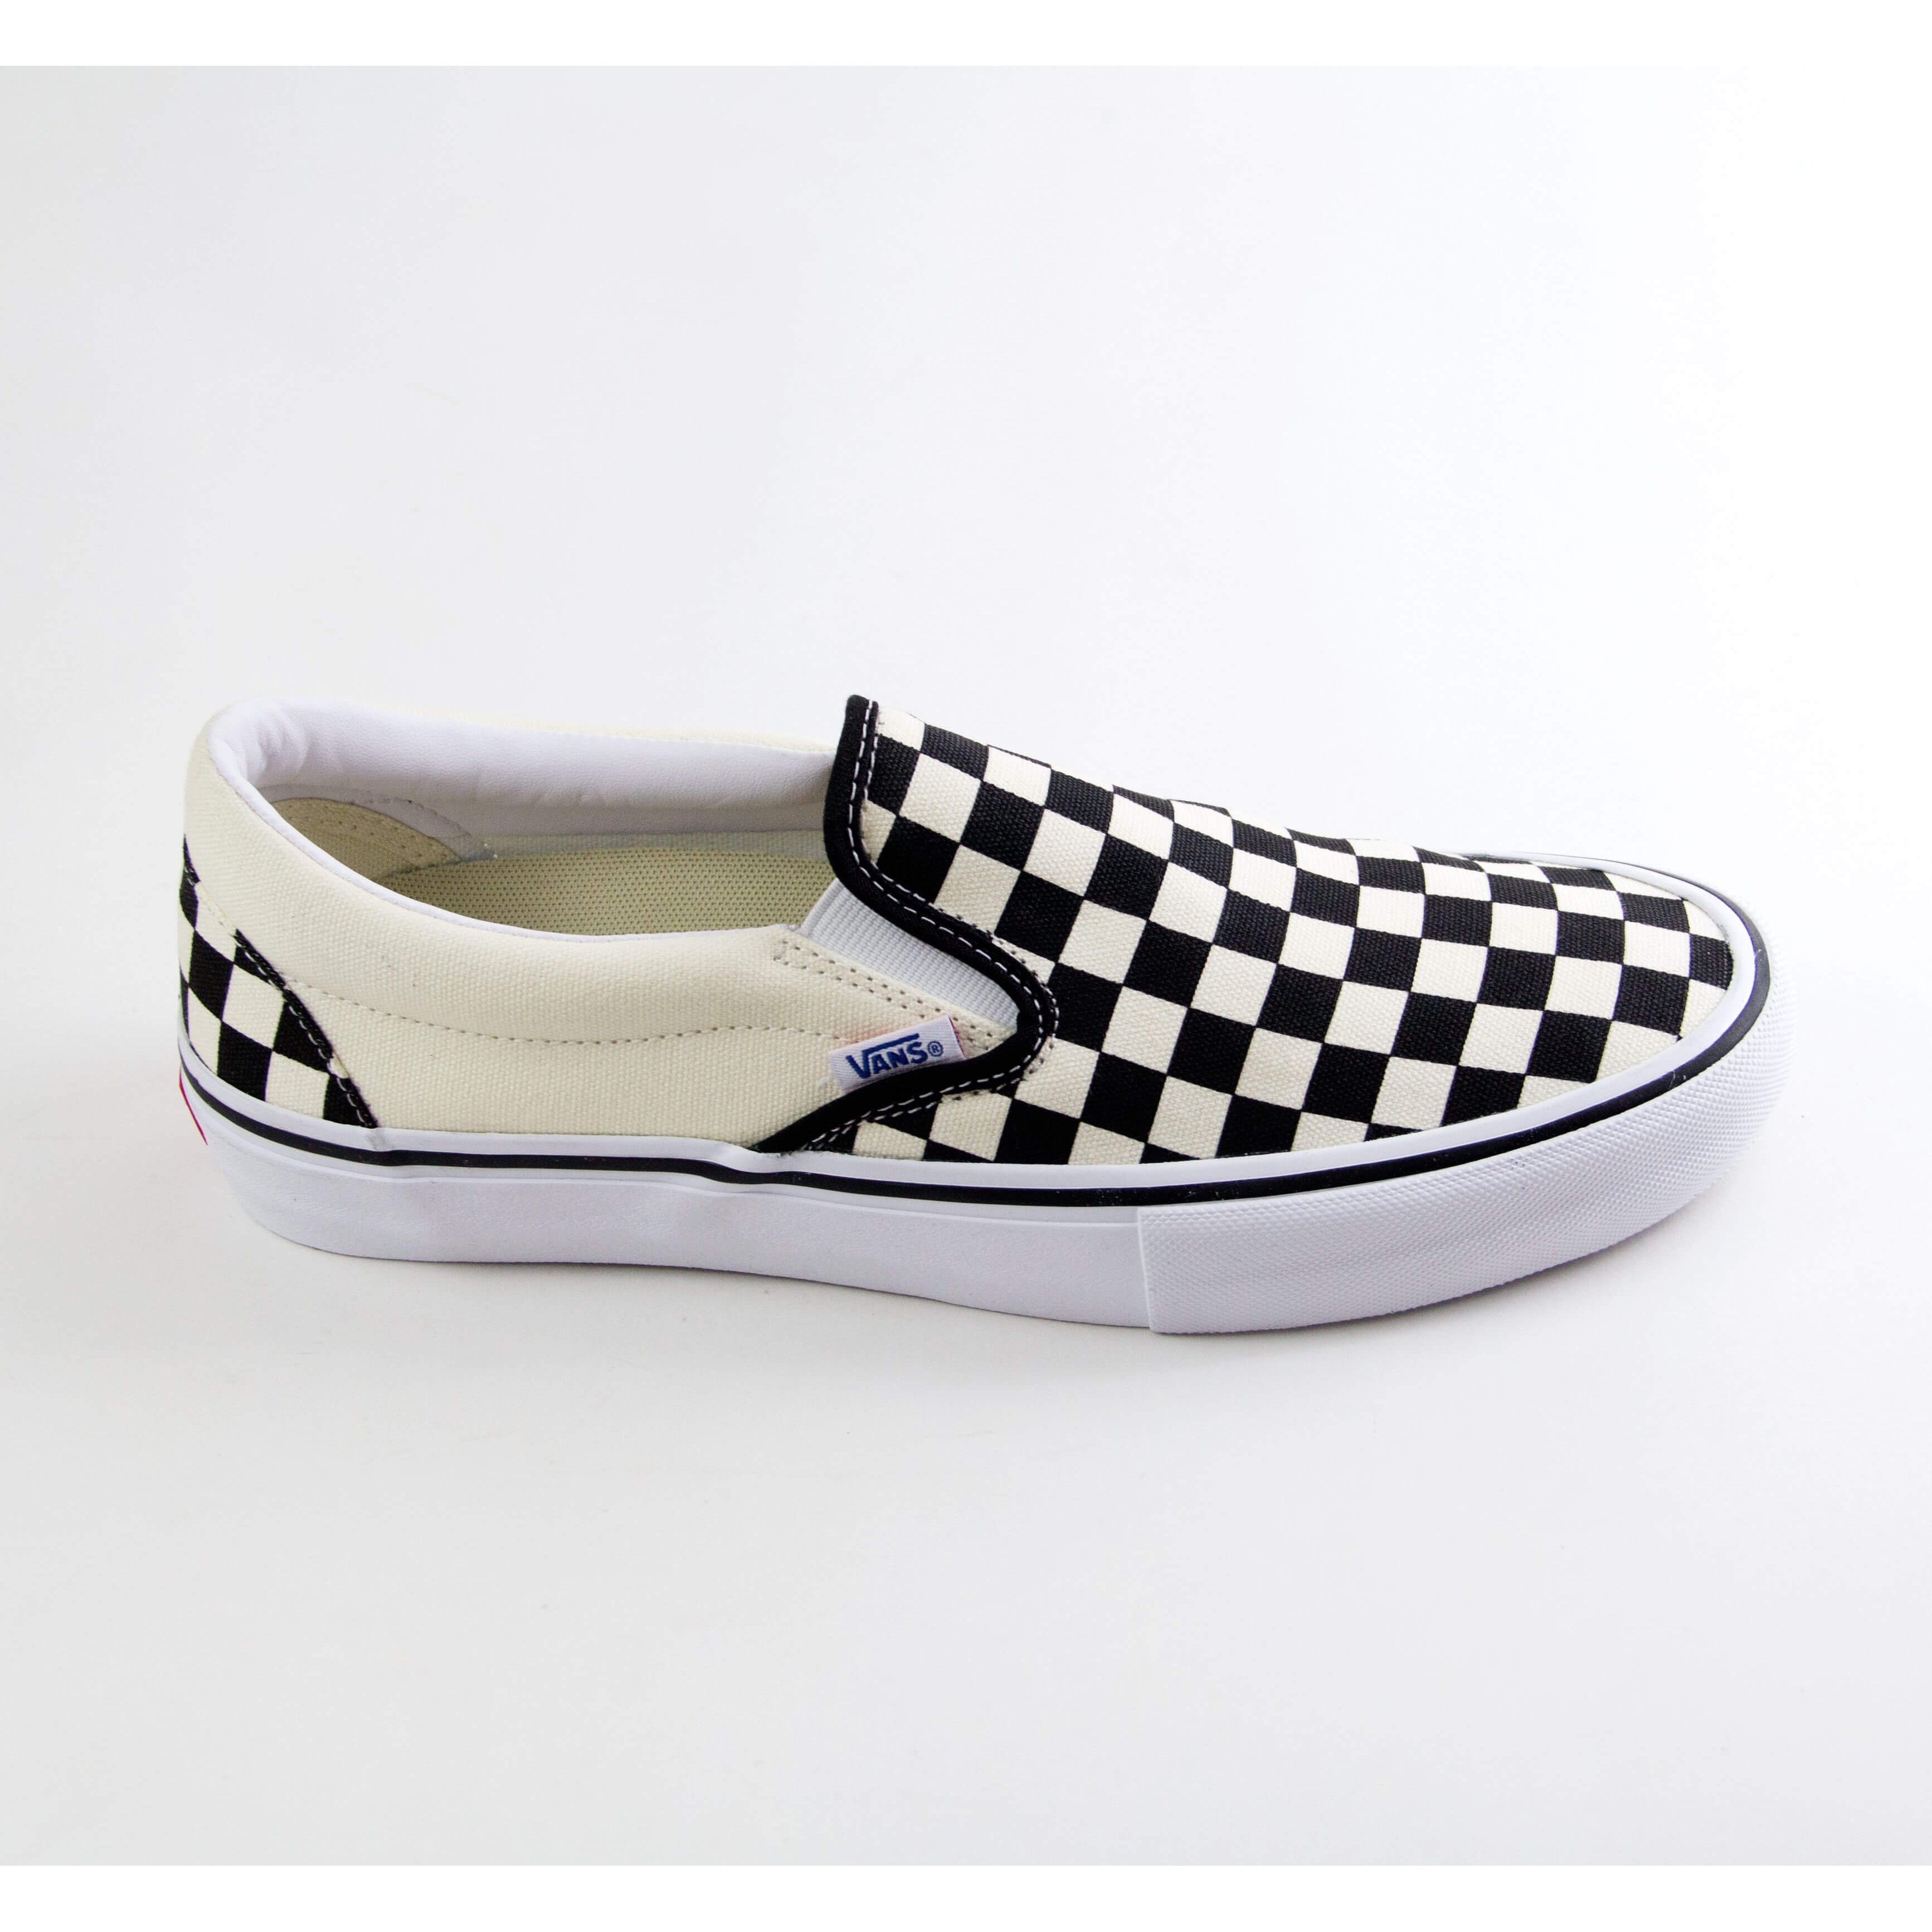 Vans Slip-On Pro (Checkerboard) Shoes at Embassy